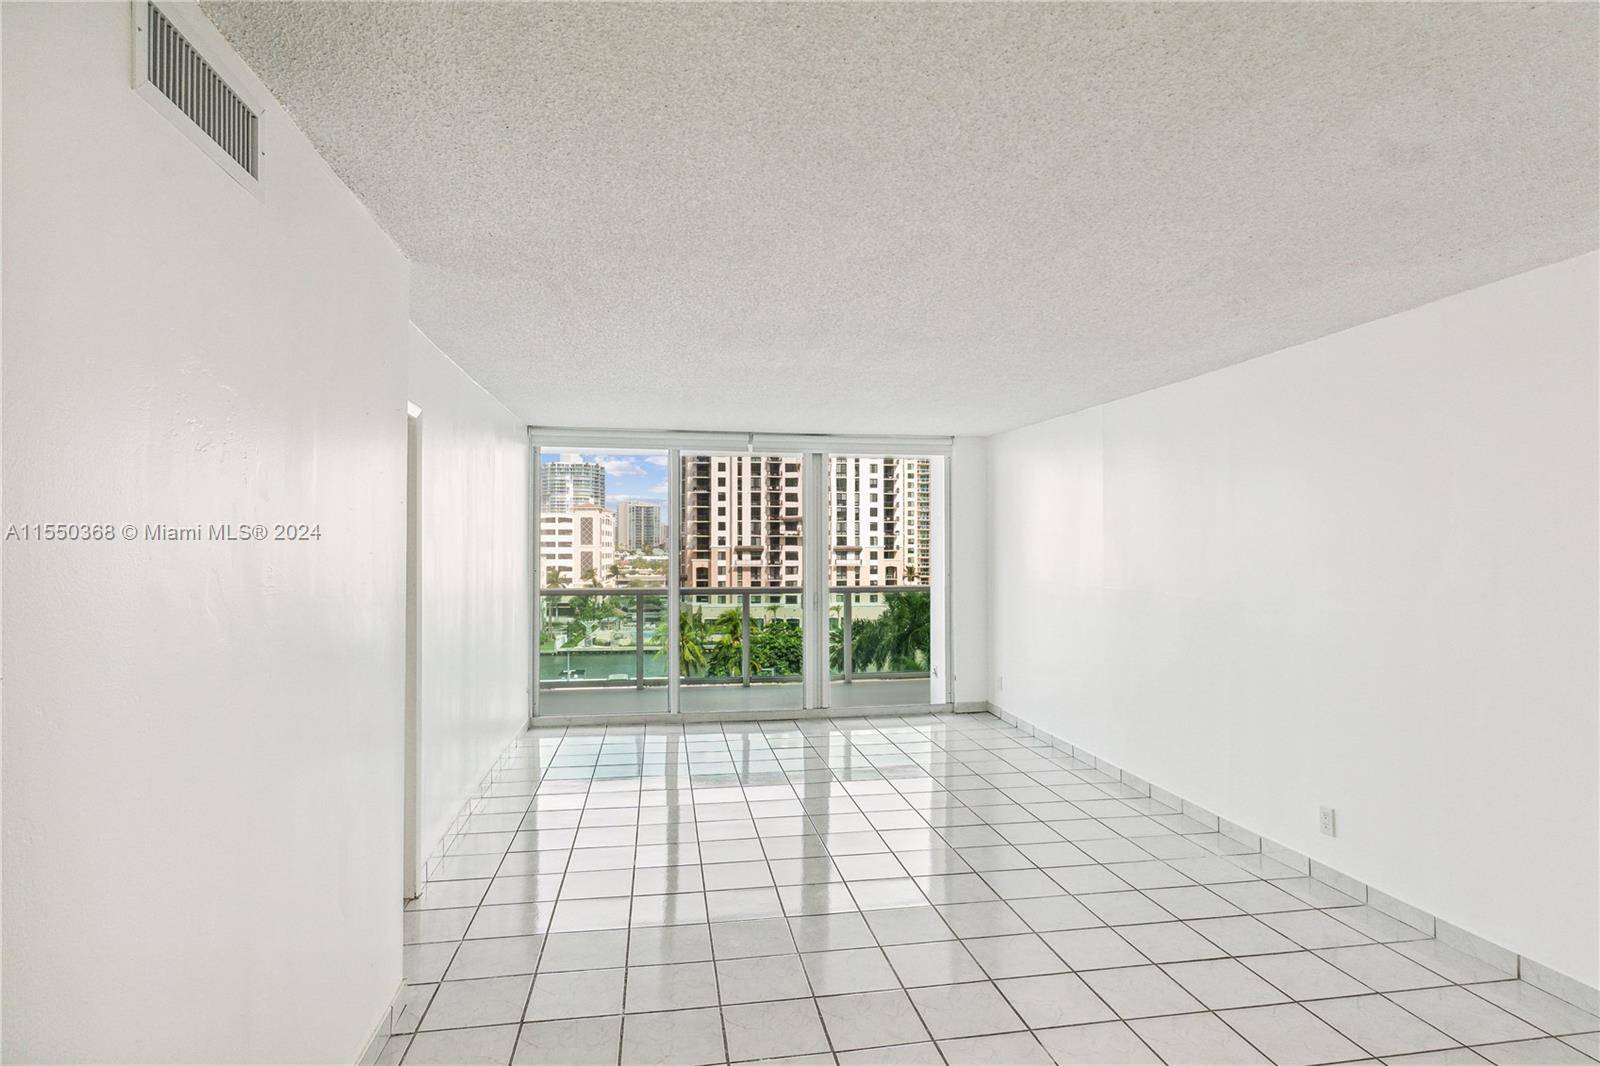 Experience breathtaking views of Sunny Isles and the serene canal from your balcony.